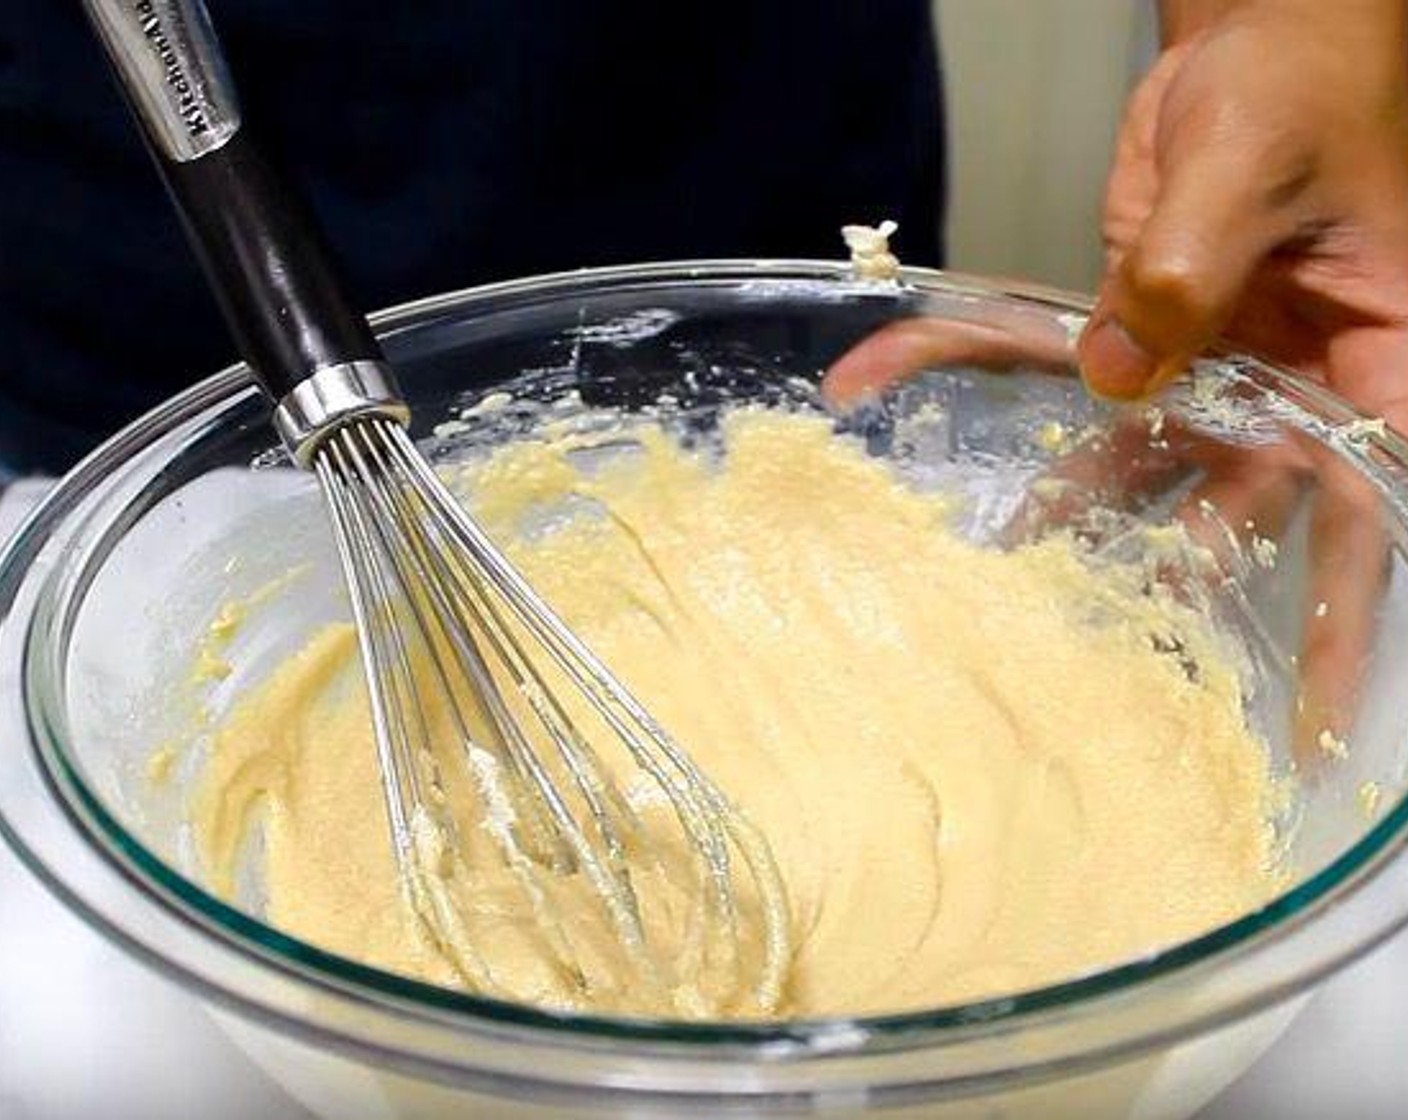 step 1 In a mixing bowl, add Butter (1/2 cup), Granulated Sugar (1/4 cup), and Brown Sugar (1/2 cup). Stir together. Add Farmhouse Eggs® Large Brown Egg (1) and Vanilla Extract (1 tsp) and whisk until combined.